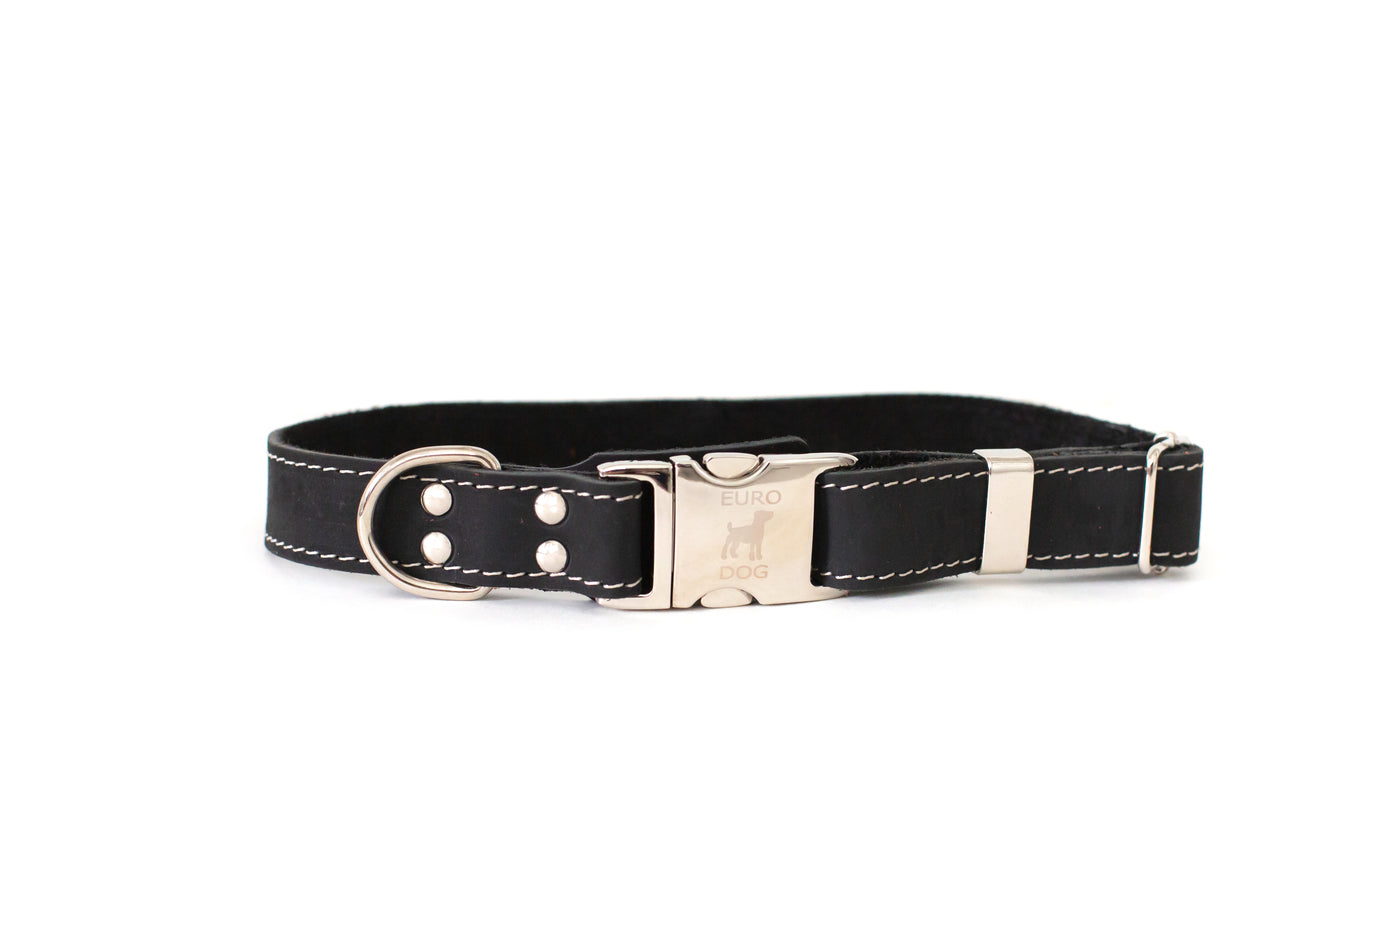 Euro Dog Soft Leather Metal Quick-Release Buckle Dog Collar Made in USA